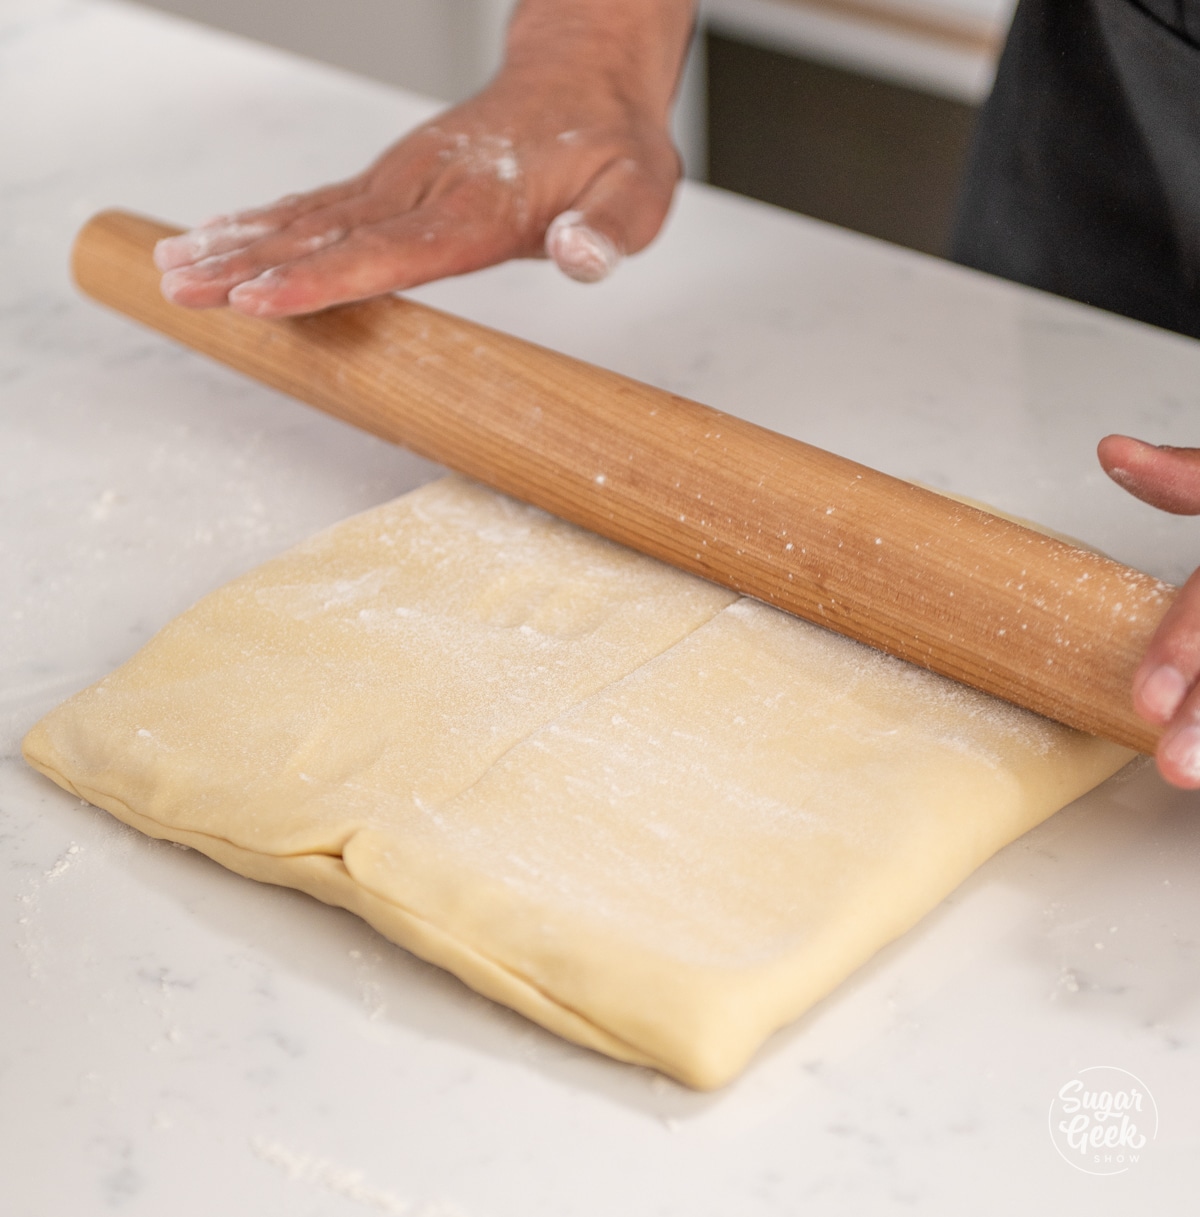 hands holding a rolling pin on top of croissant dough